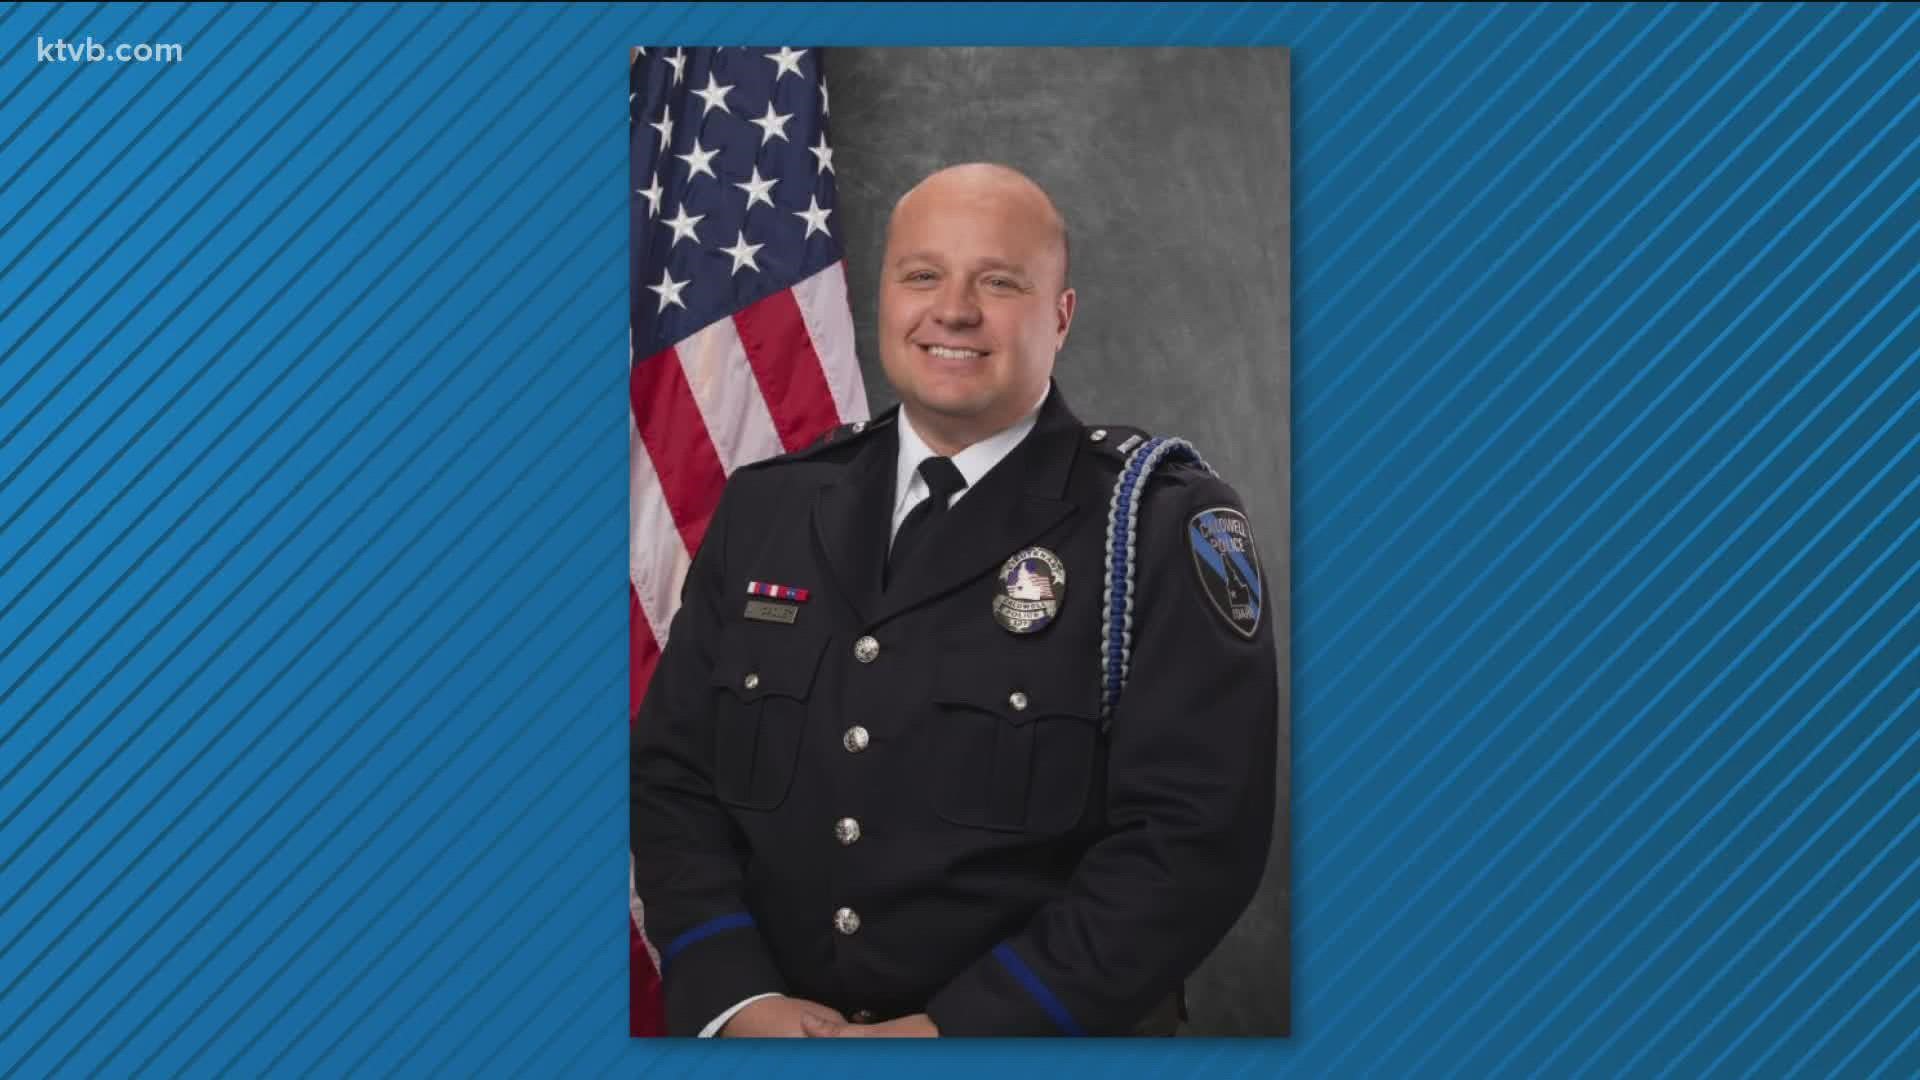 Lt. Joseph Hoadley, who led the investigations division, was terminated on May 3. He had been on paid administrative leave since late January.